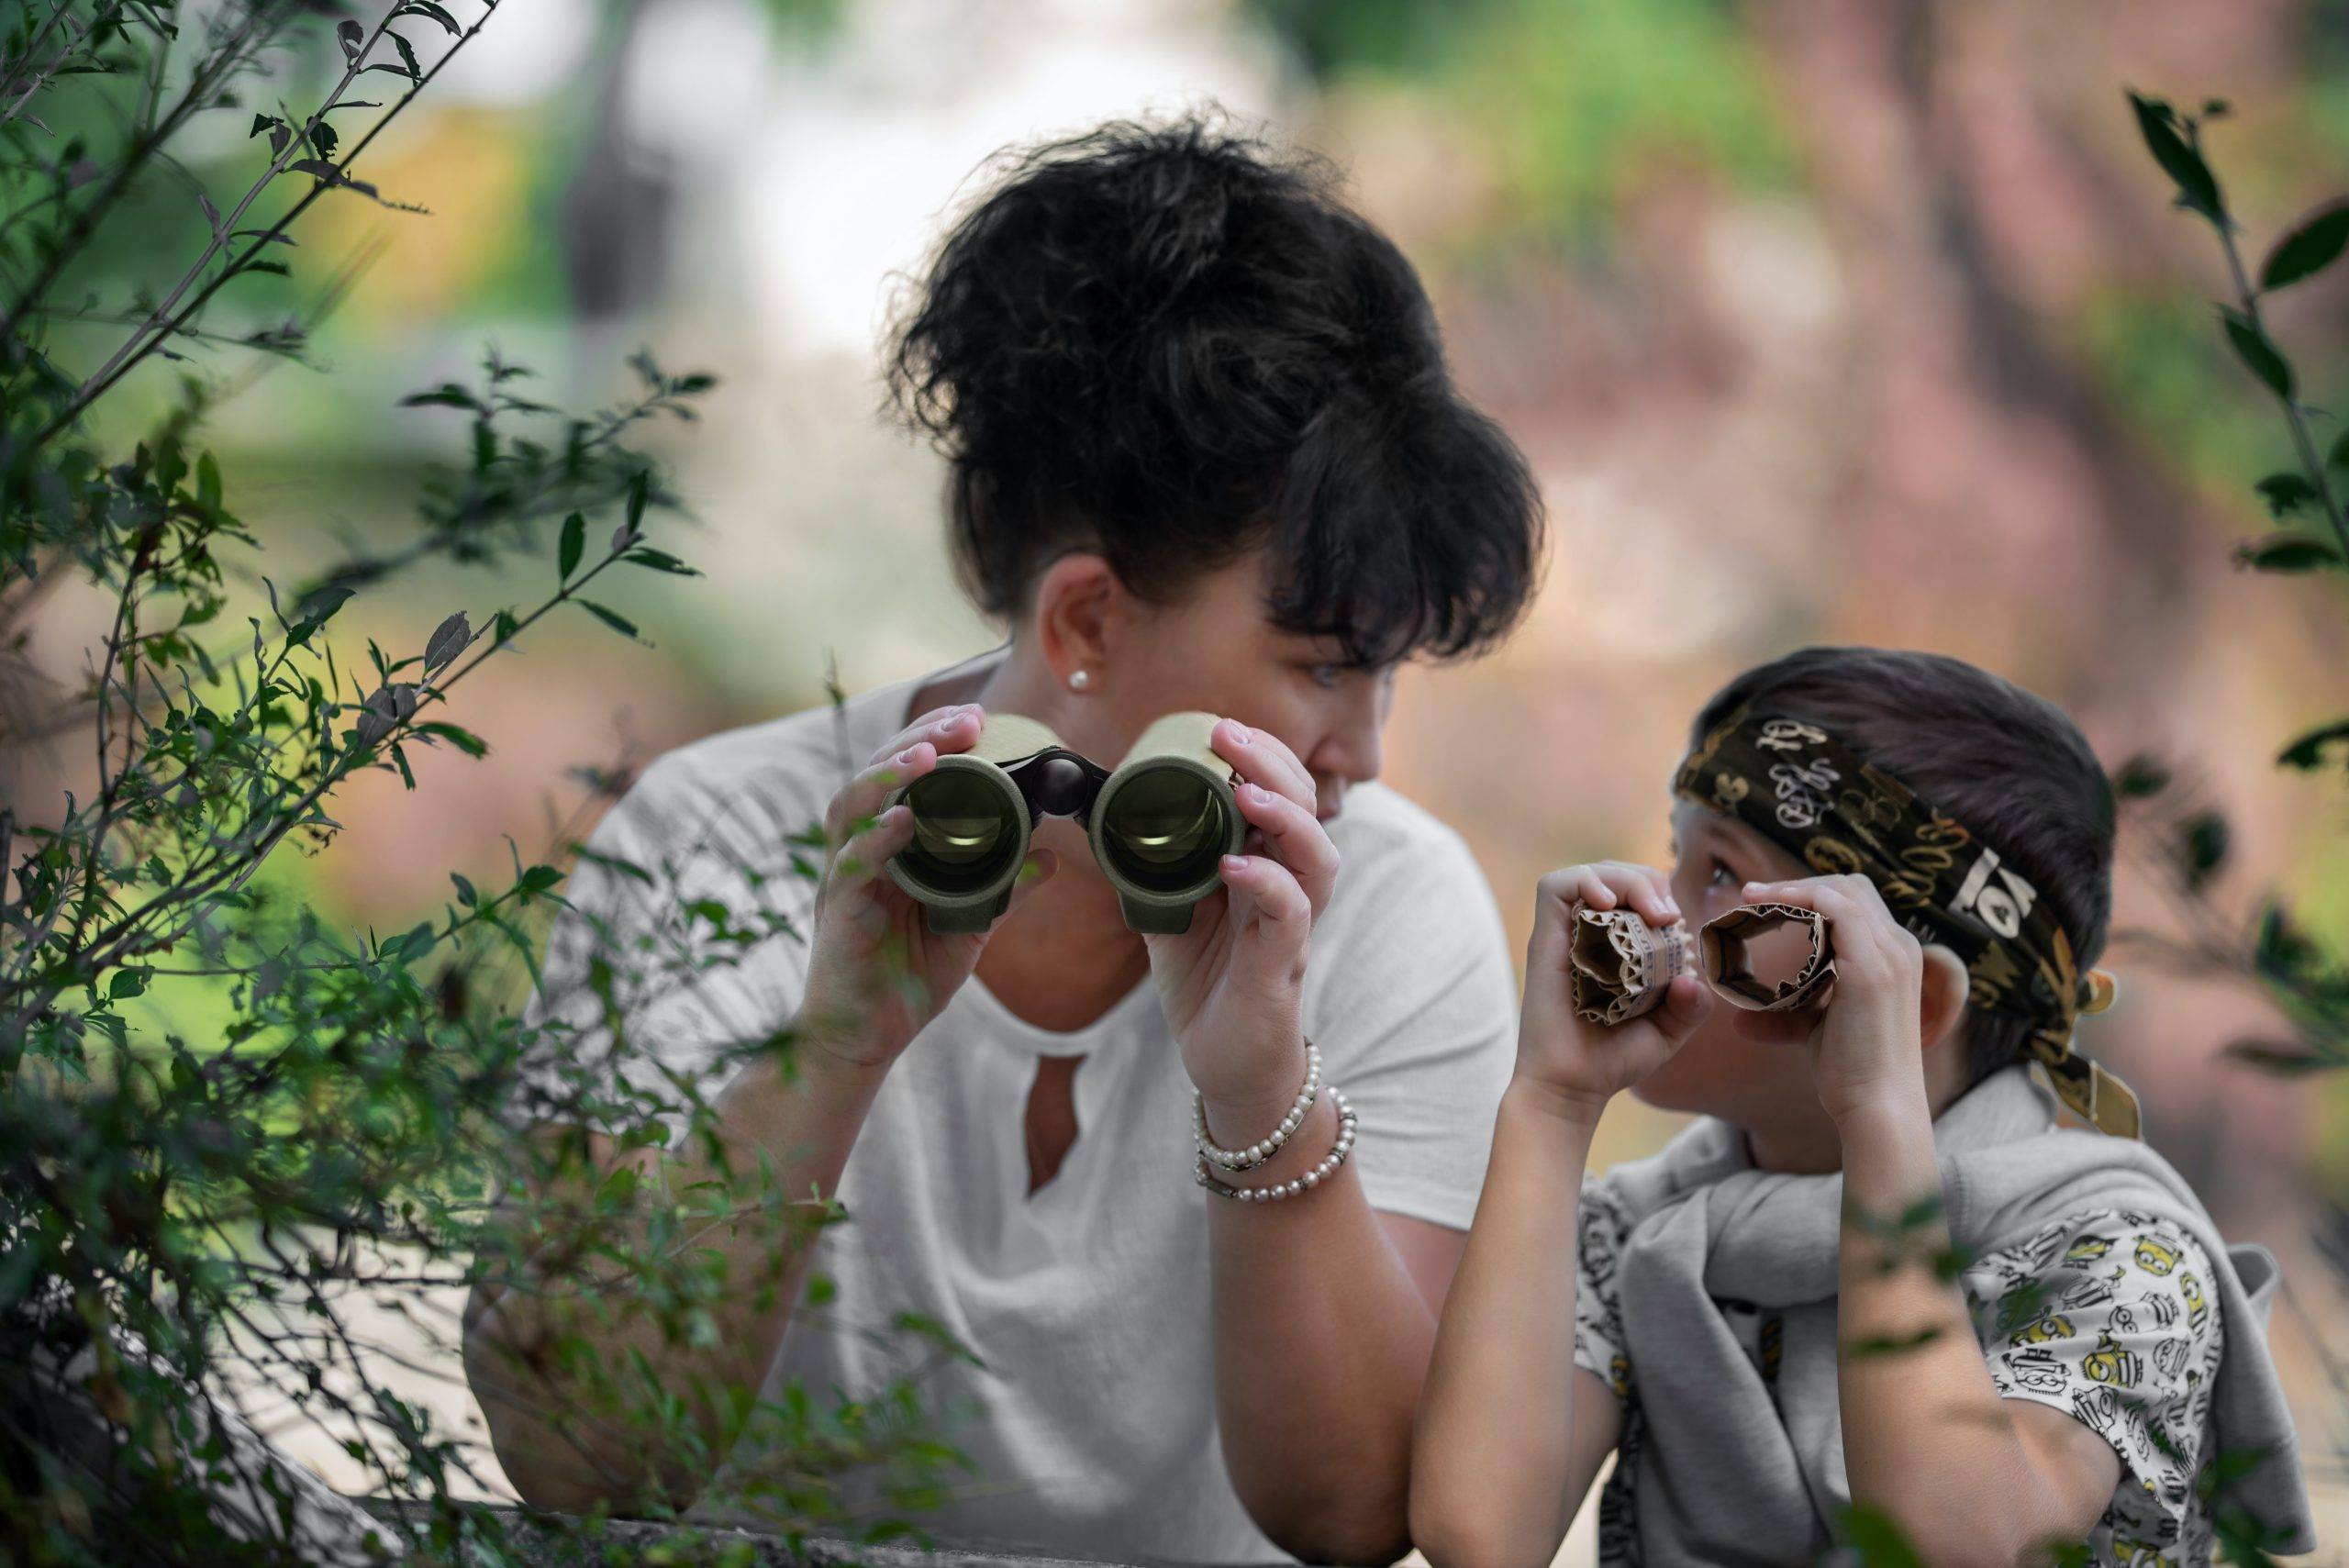 Developing keen observation skills mother and child observing the world through binoculars